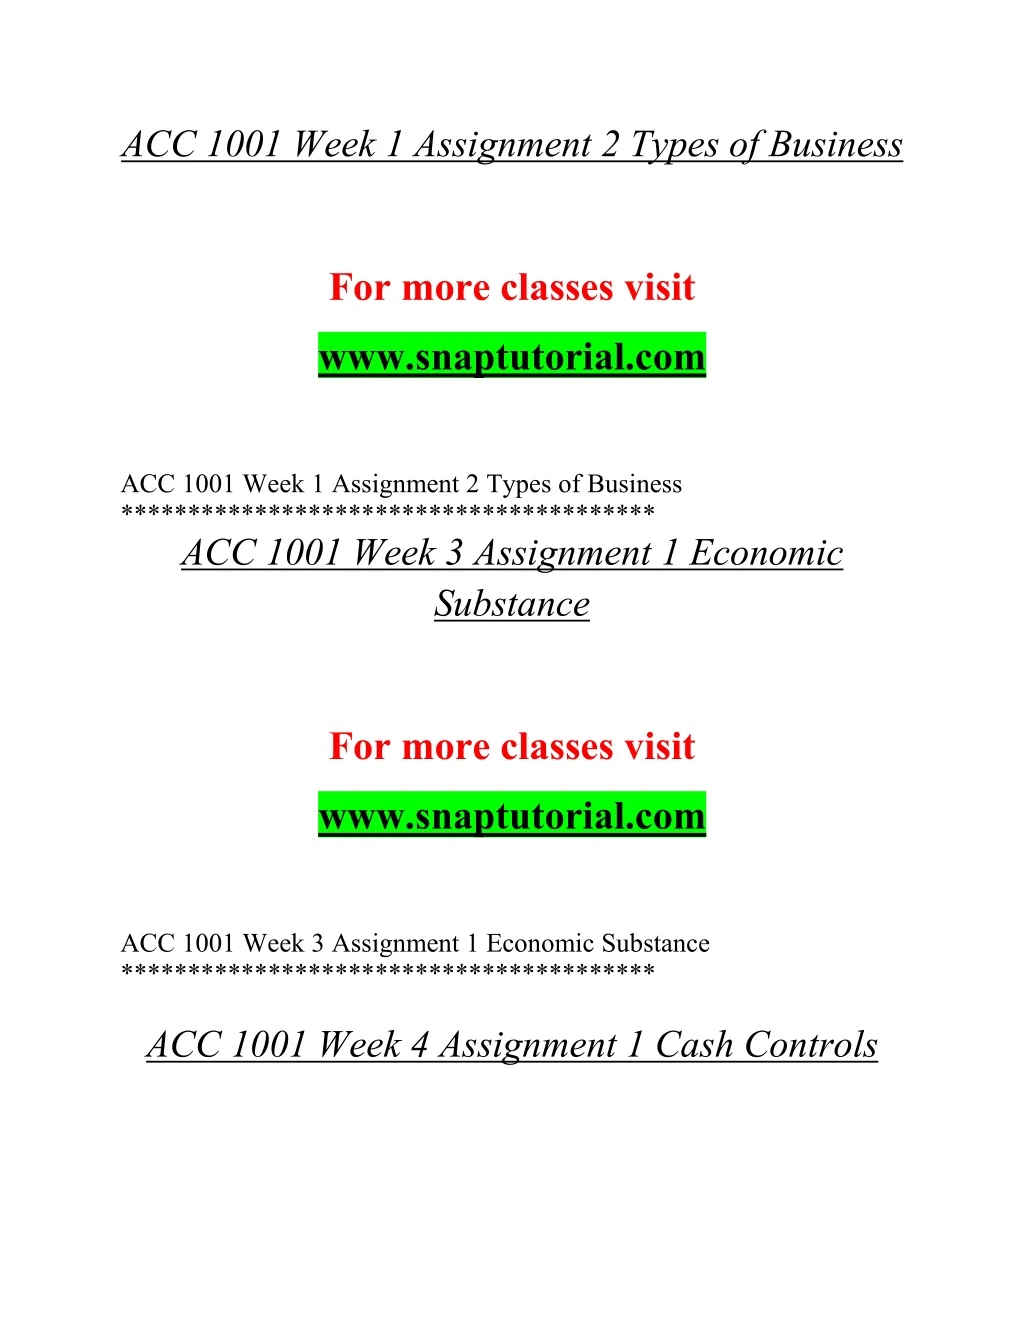 acc 1001 week 1 assignment 2 types of business